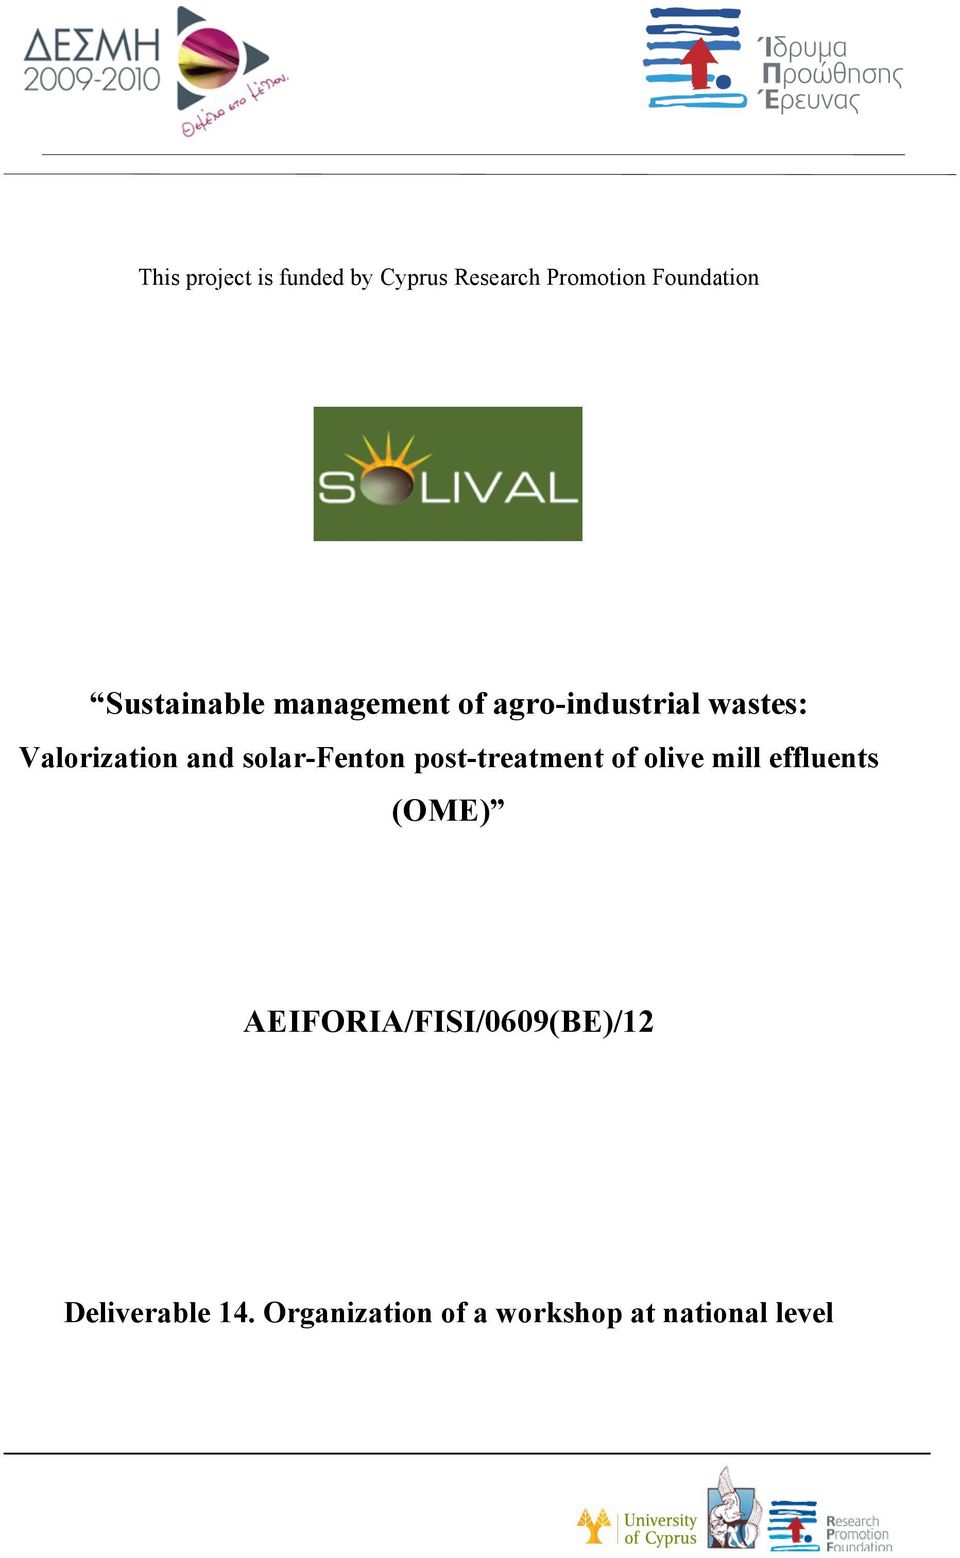 solar-fenton post-treatment of olive mill effluents (OME)